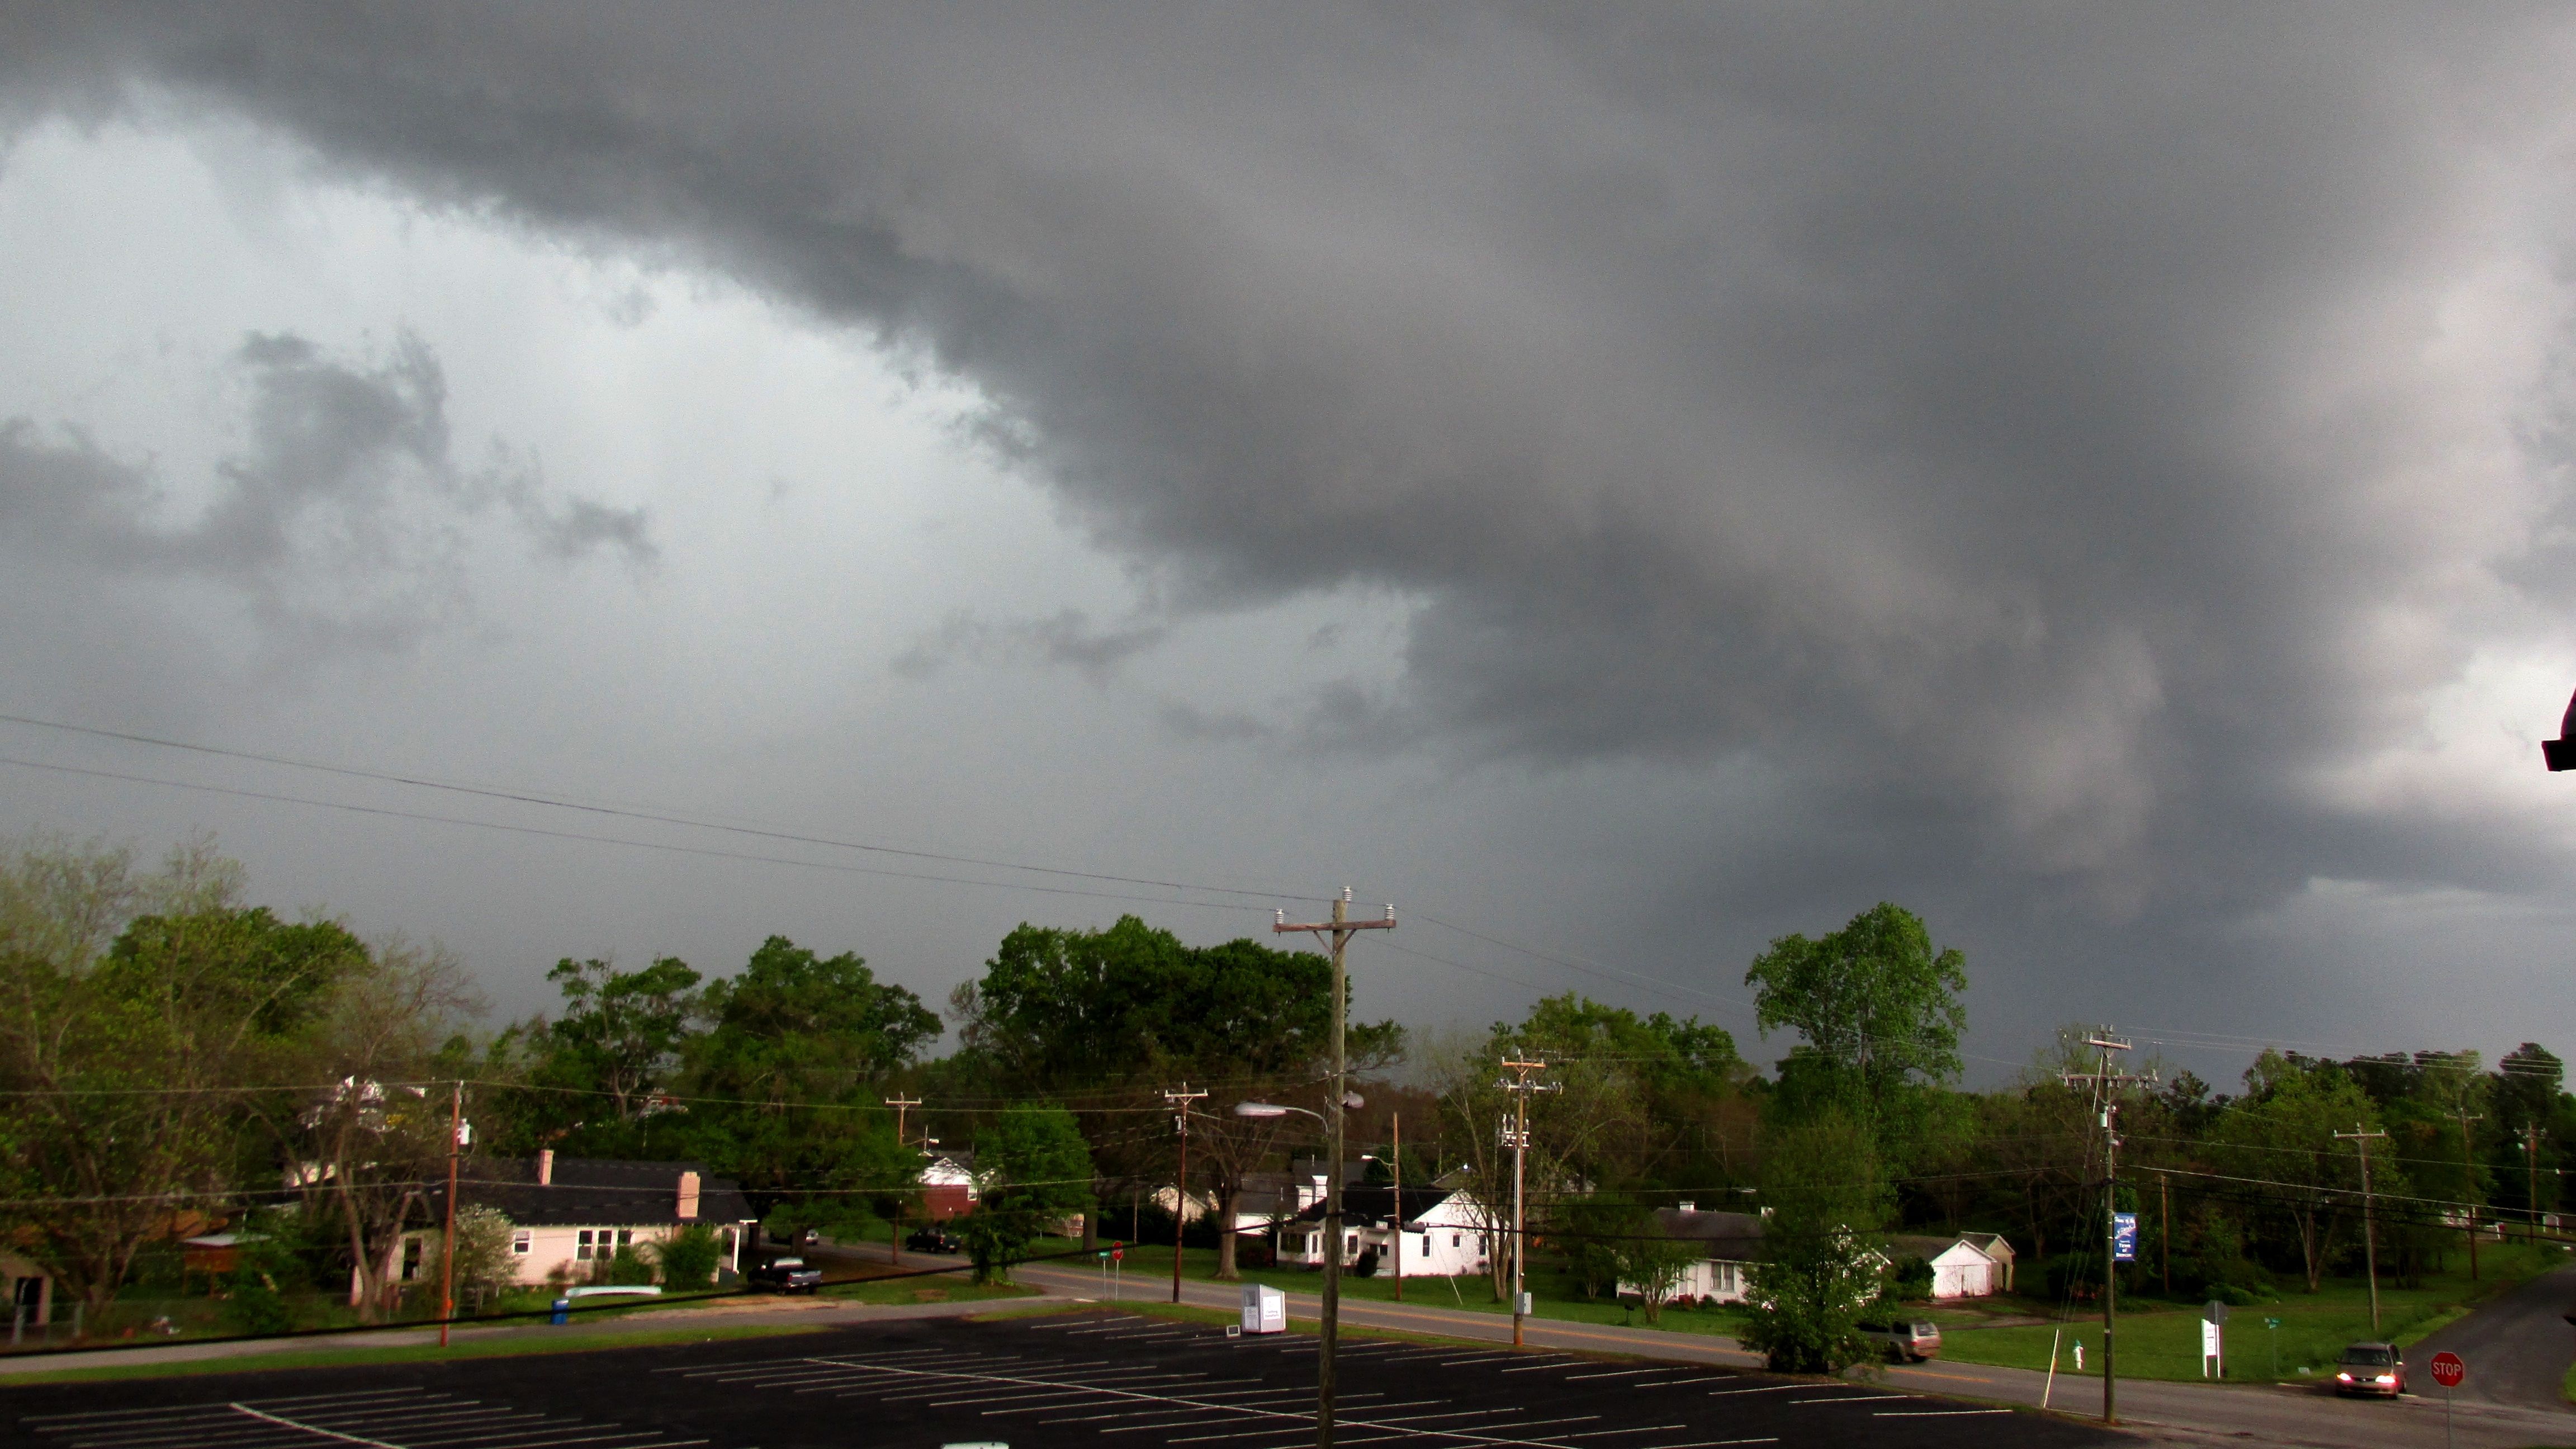 Thunderstorm and Hail storm. April 20, 2015. Duncan, SC. | Weather ...